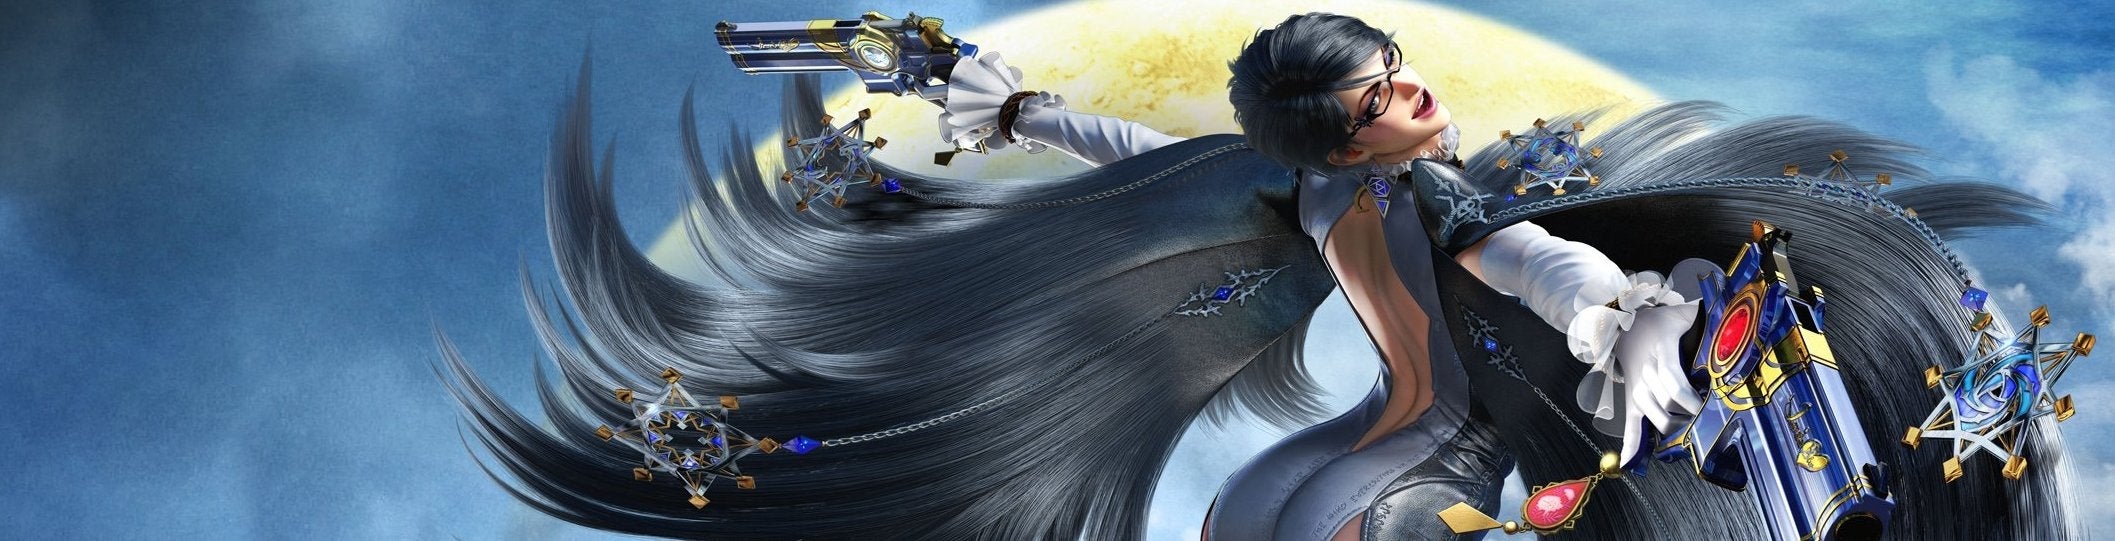 Image for Digital Foundry: Hands-on with Bayonetta 2